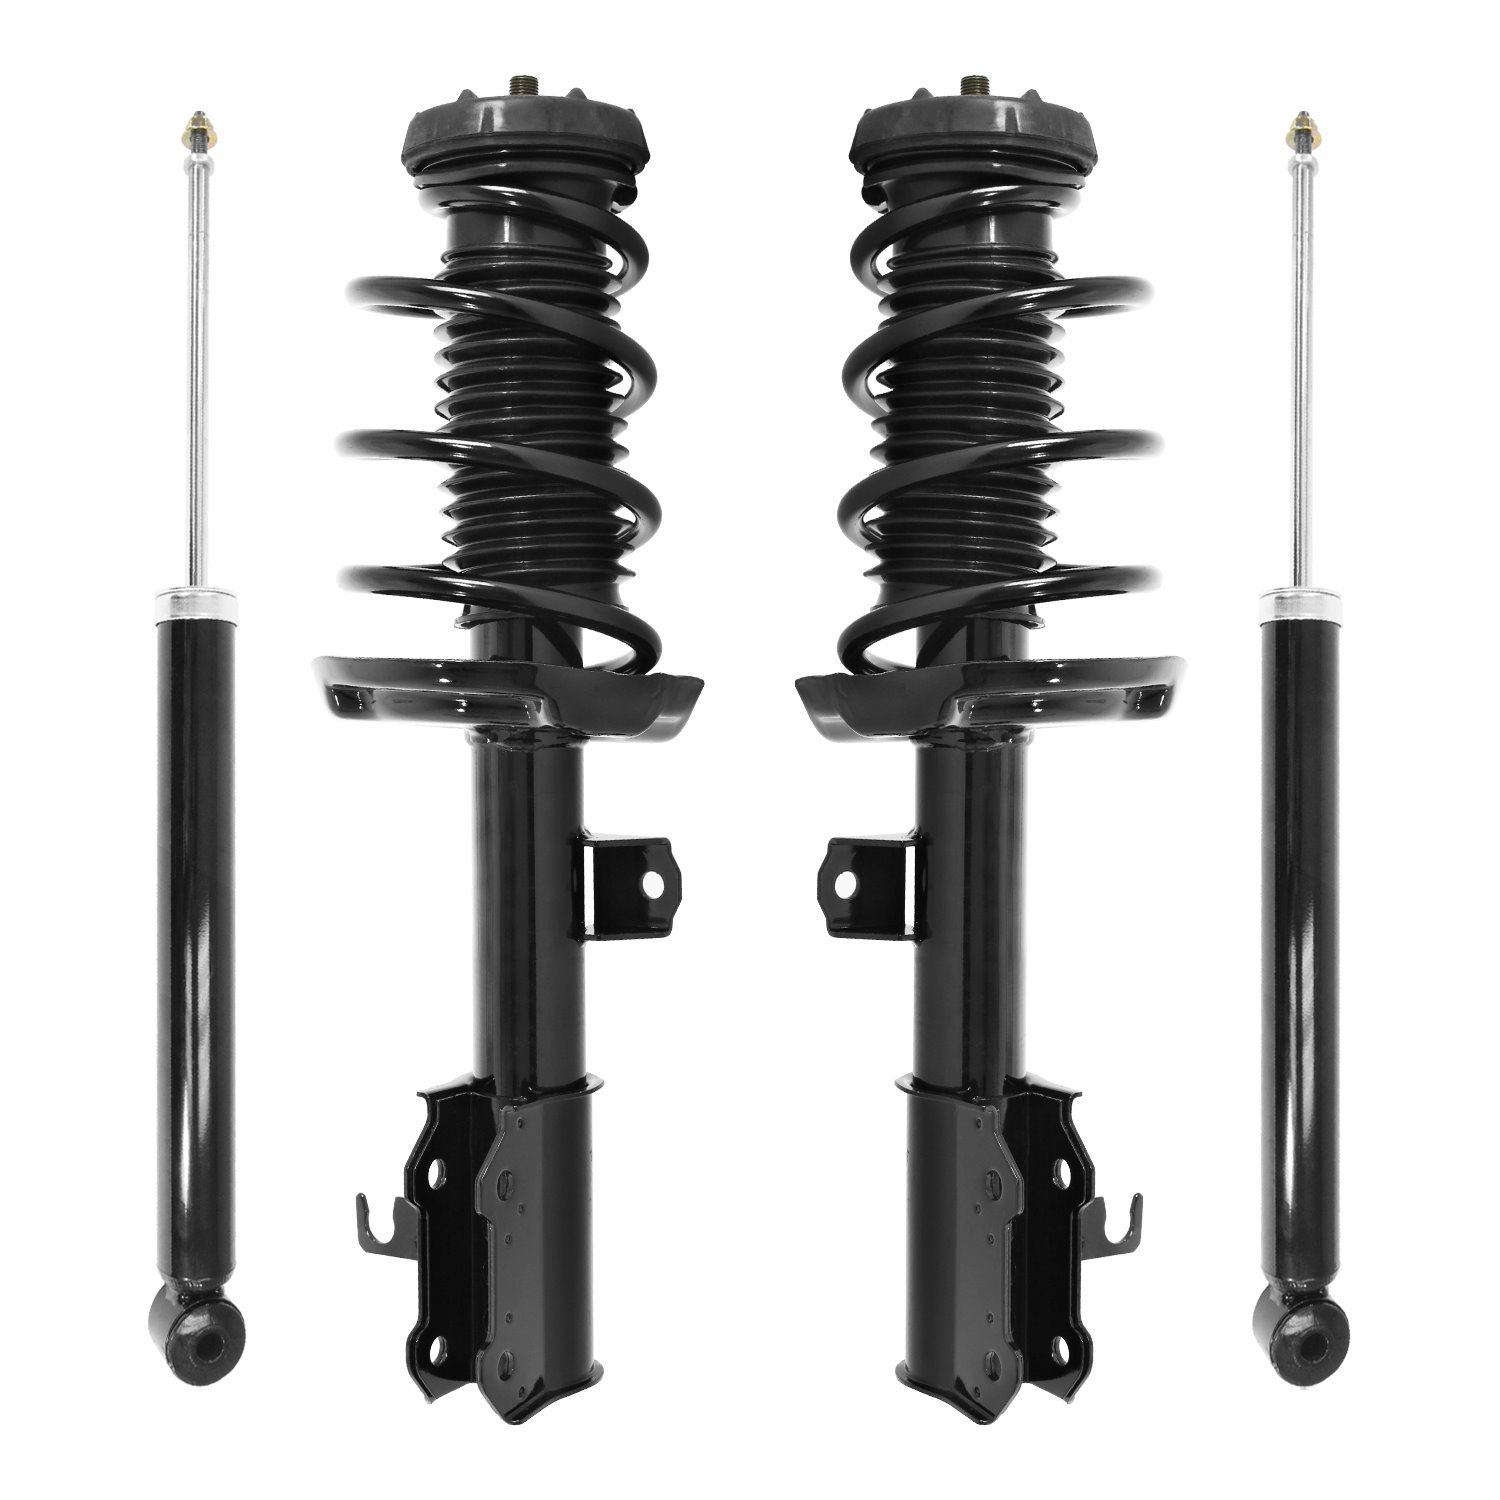 4-11881-251180-001 Front & Rear Suspension Strut & Coil Spring Assembly Fits Select Chevy Cruze